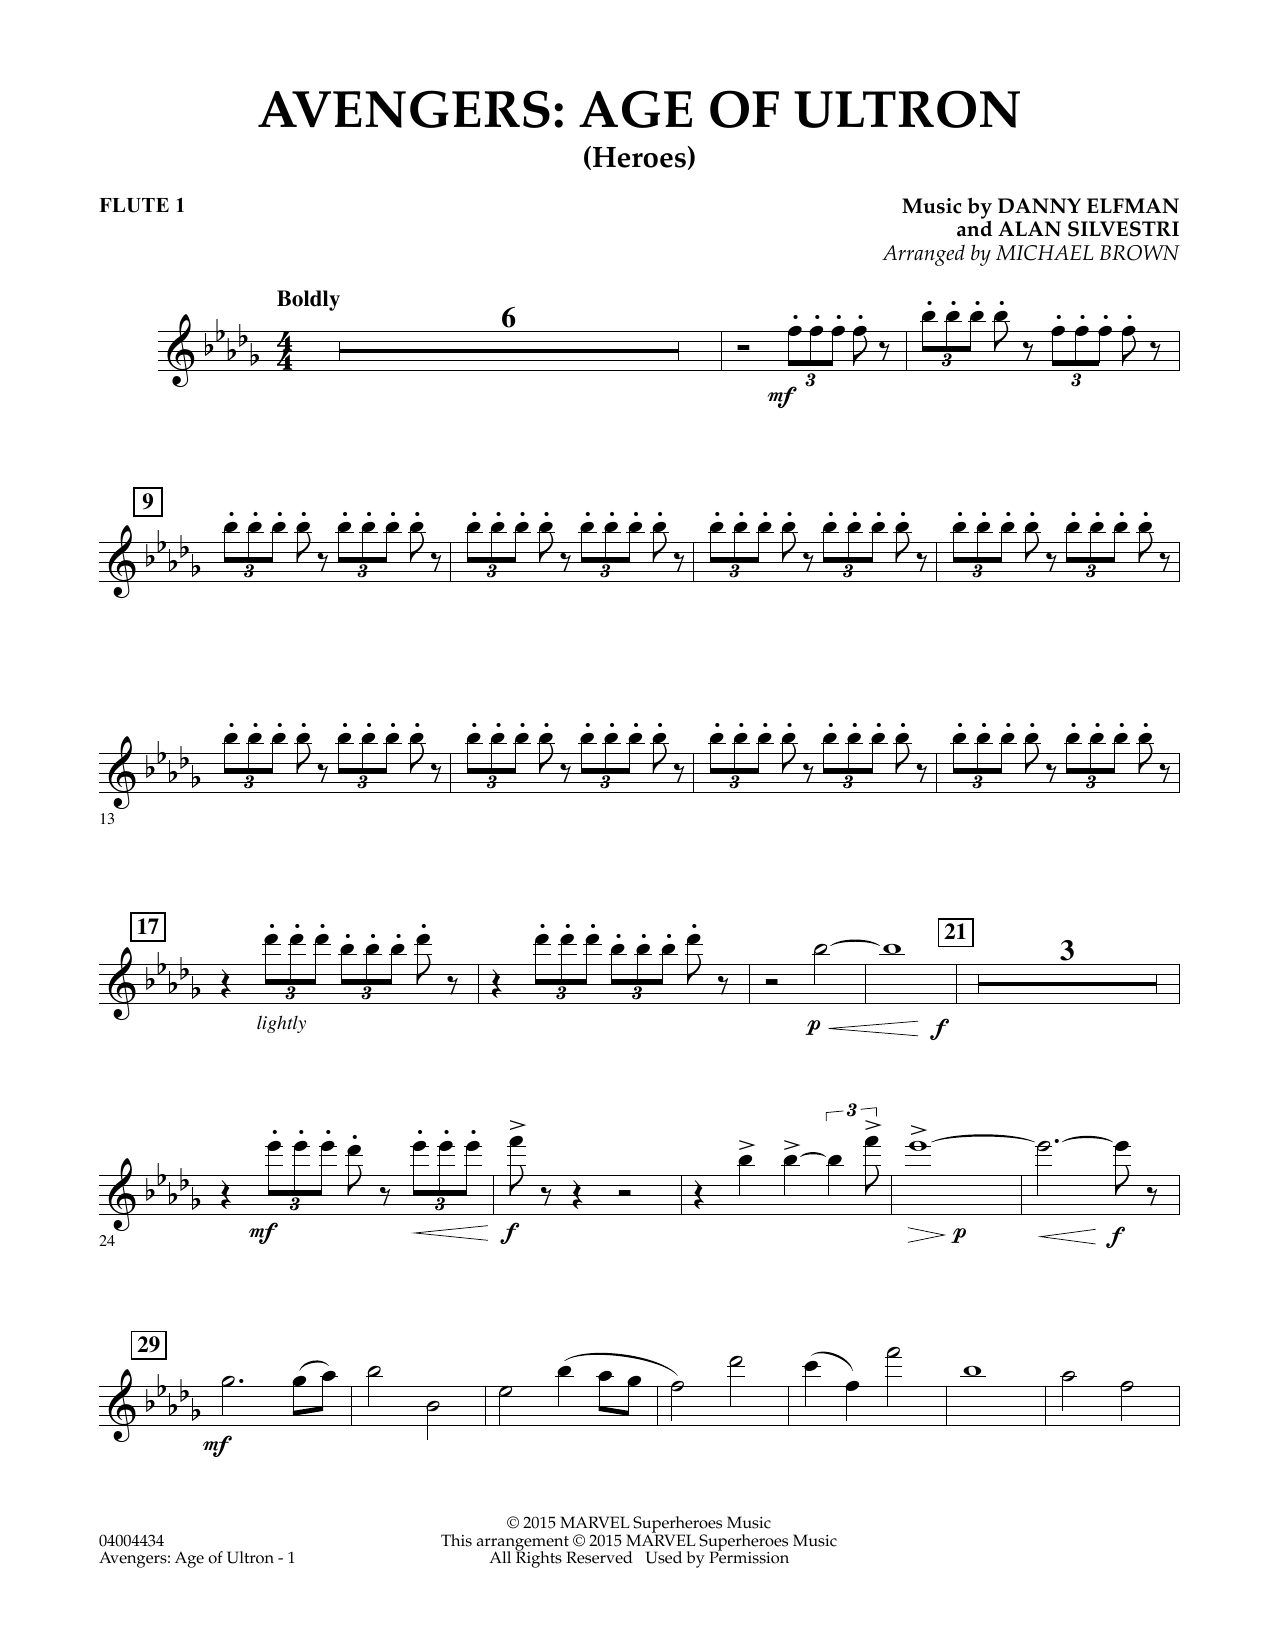 Michael Brown Avengers: The Age of Ultron (Main Theme) - Flute 1 sheet music notes and chords. Download Printable PDF.